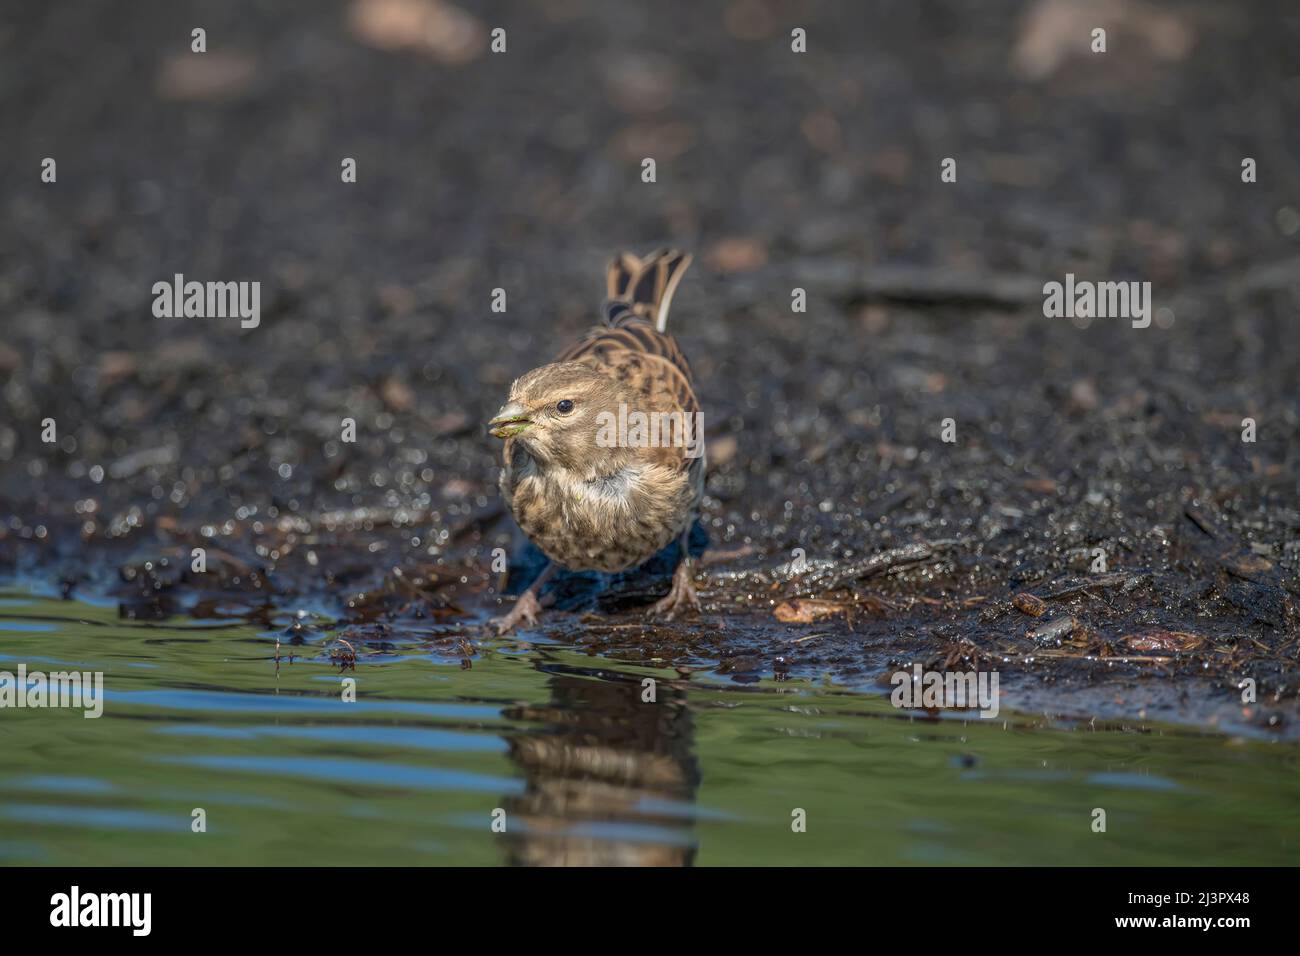 ALinnet female, perched on earth, beside a pool of water, close up, in the summer Stock Photo